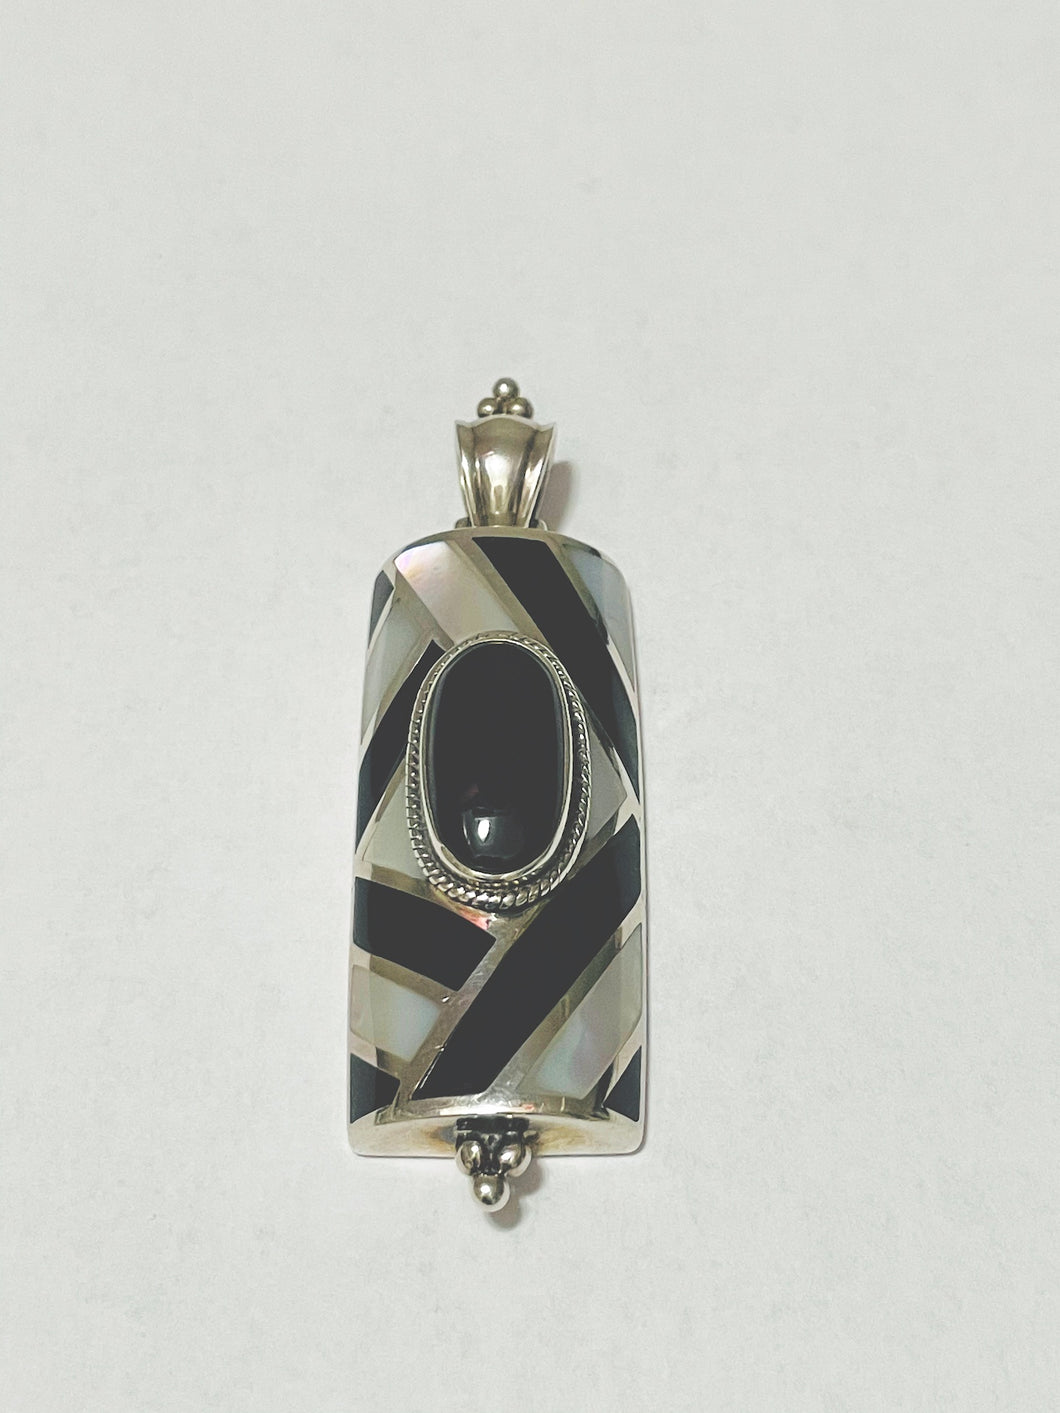 This lovely pendant consists of a lovely Mother of Pearl and Black Onyx design with a large Onyx stone in the middle.  It measures 2.75 X 1.24 inches.  We include a complimentary Sterling Silver chain to complete the over all look.